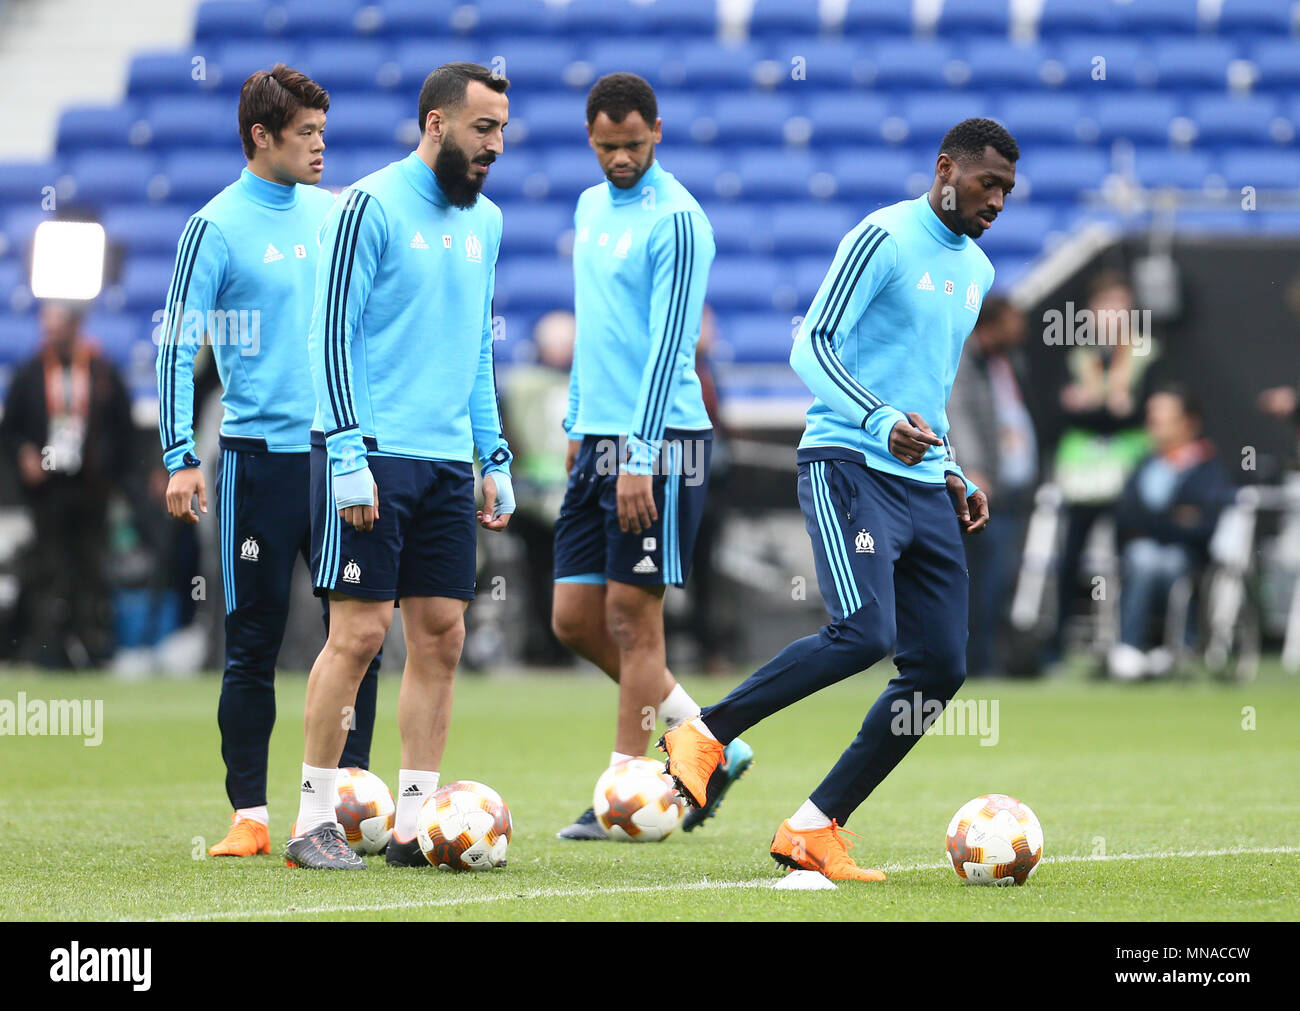 Andre-Frank Zambo Anguissa of Marseille with Luiz Gustavo of Marseille, Hiroki Sakai of Marseille and Rolando of Marseille during a Marseille training session, prior to the Europa League final, at Parc Olympique Lyonnais on May 15th 2018 in Lyon, France. (Photo by Leila Coker/phcimages.com) Stock Photo